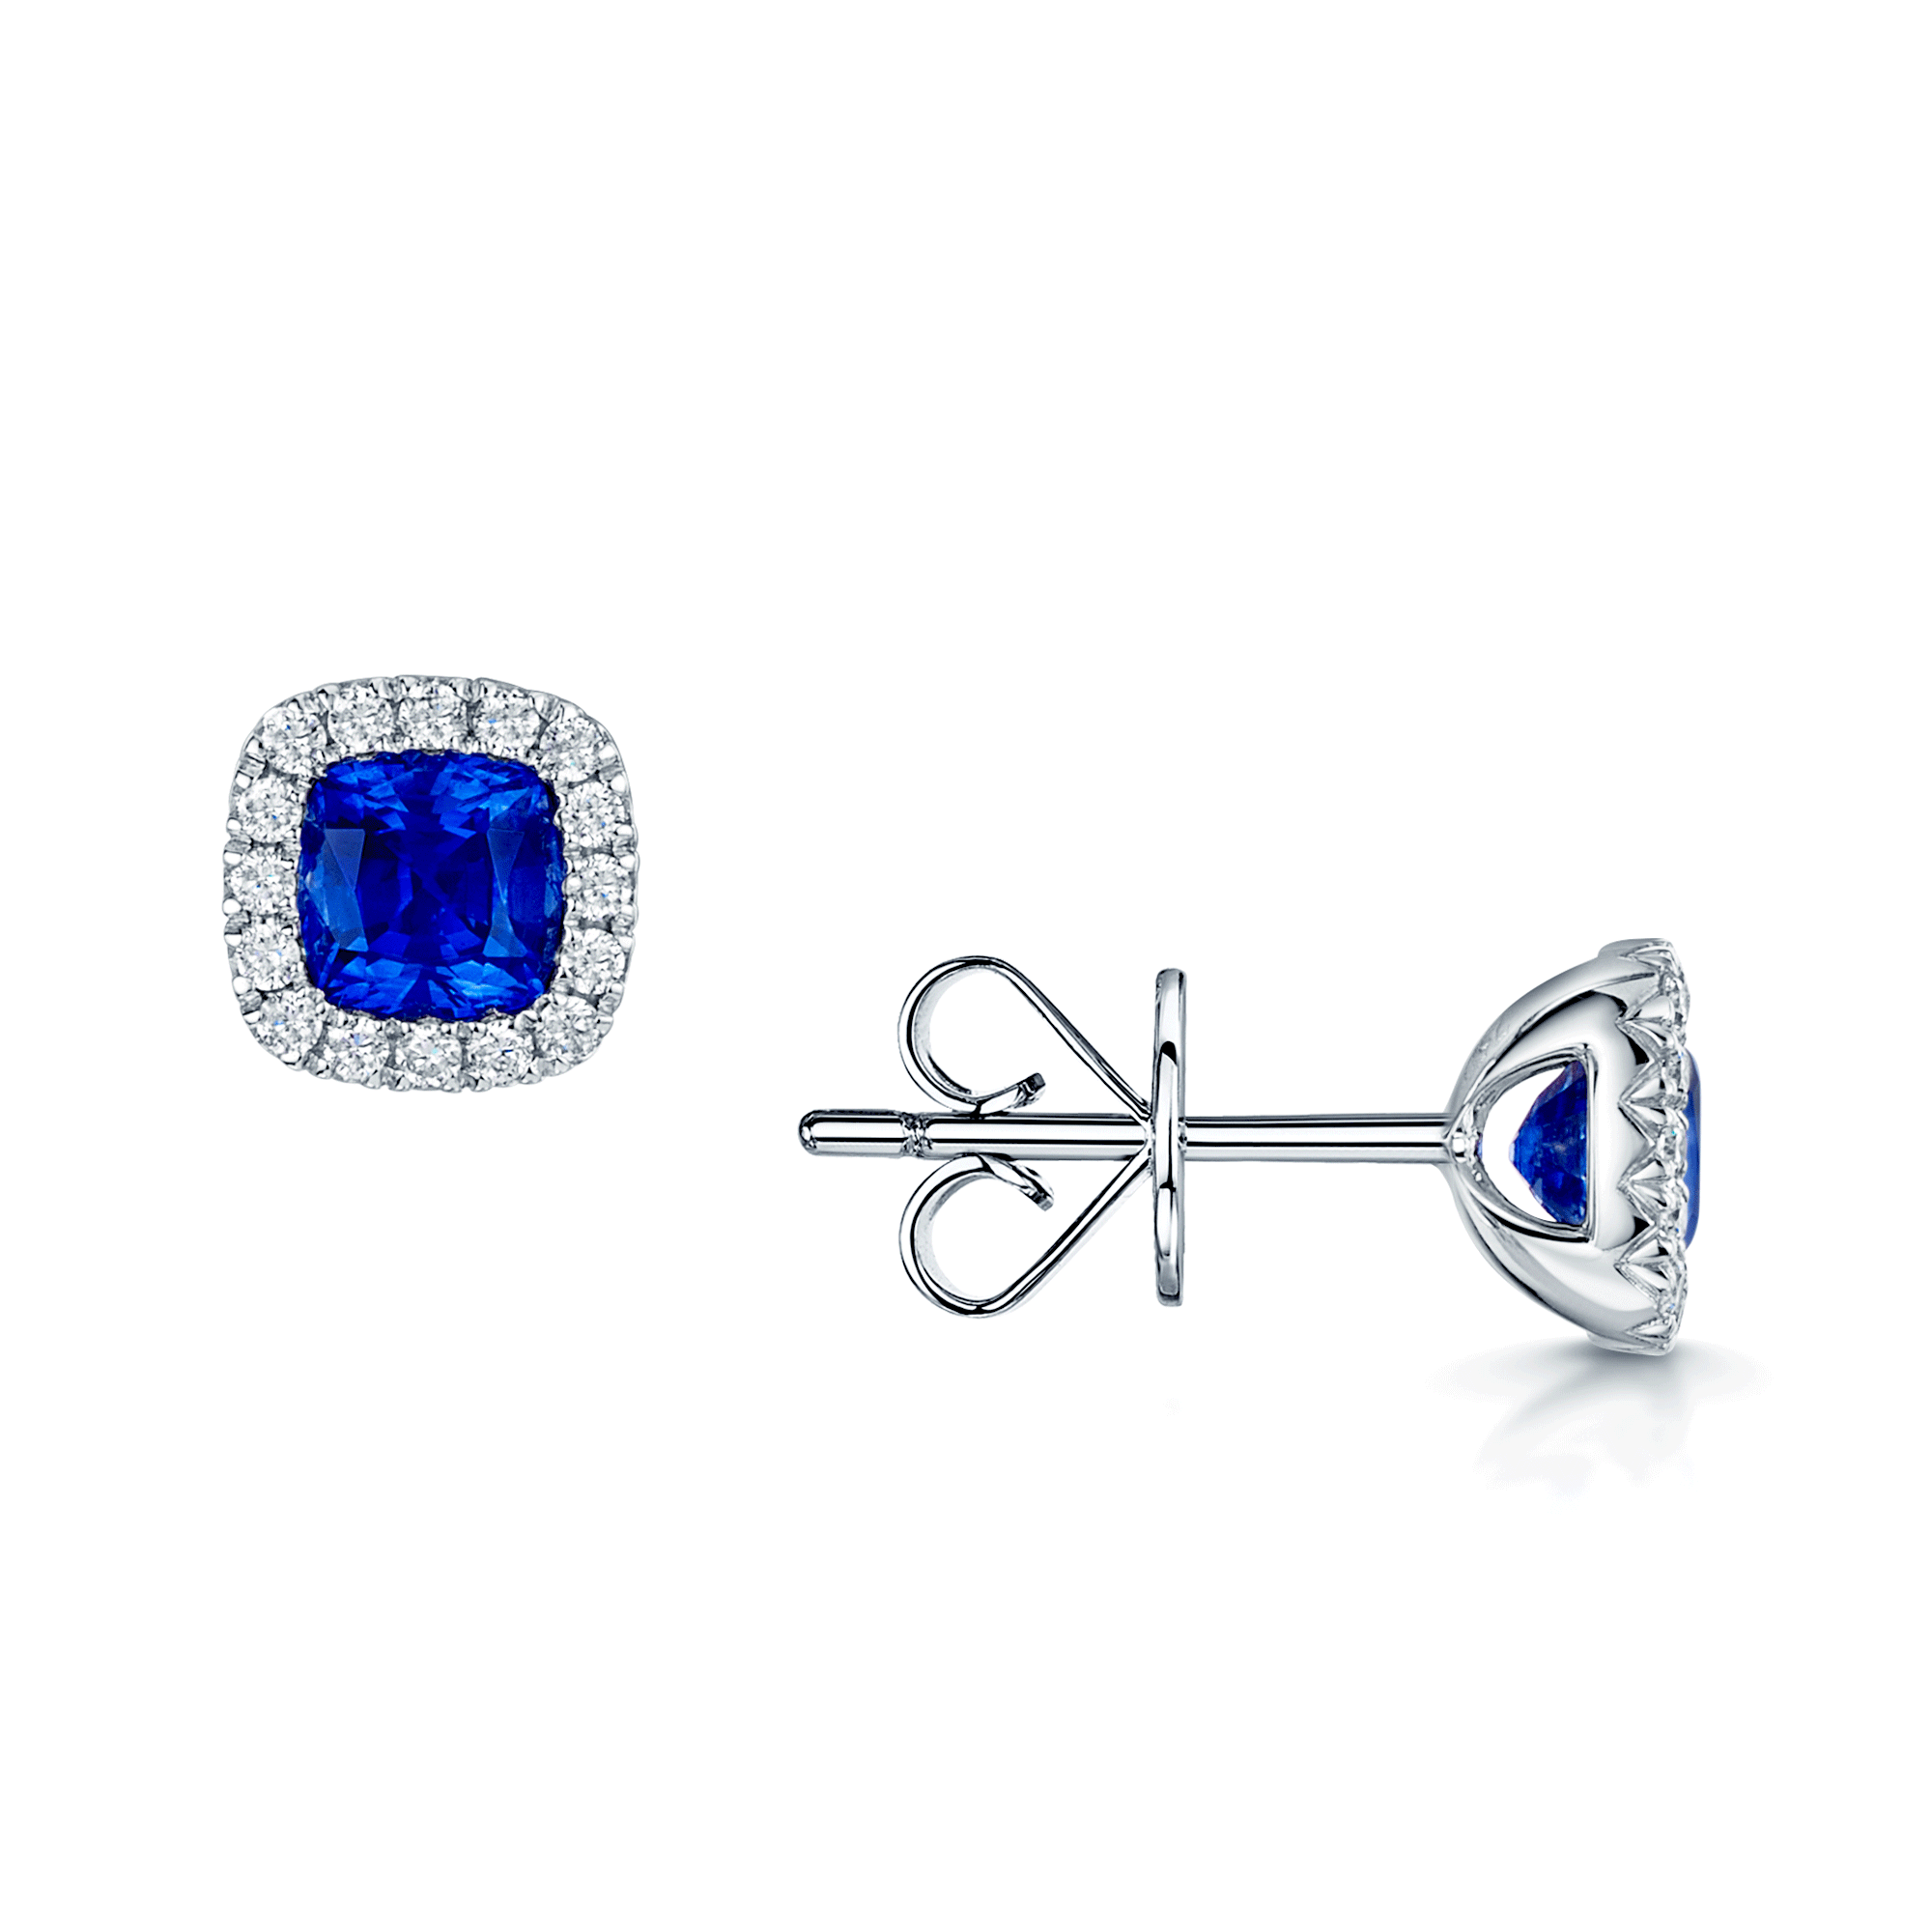 18ct White Gold Cushion Blue Sapphire With Round Brilliant Cut Diamond Halo Stud Earrings